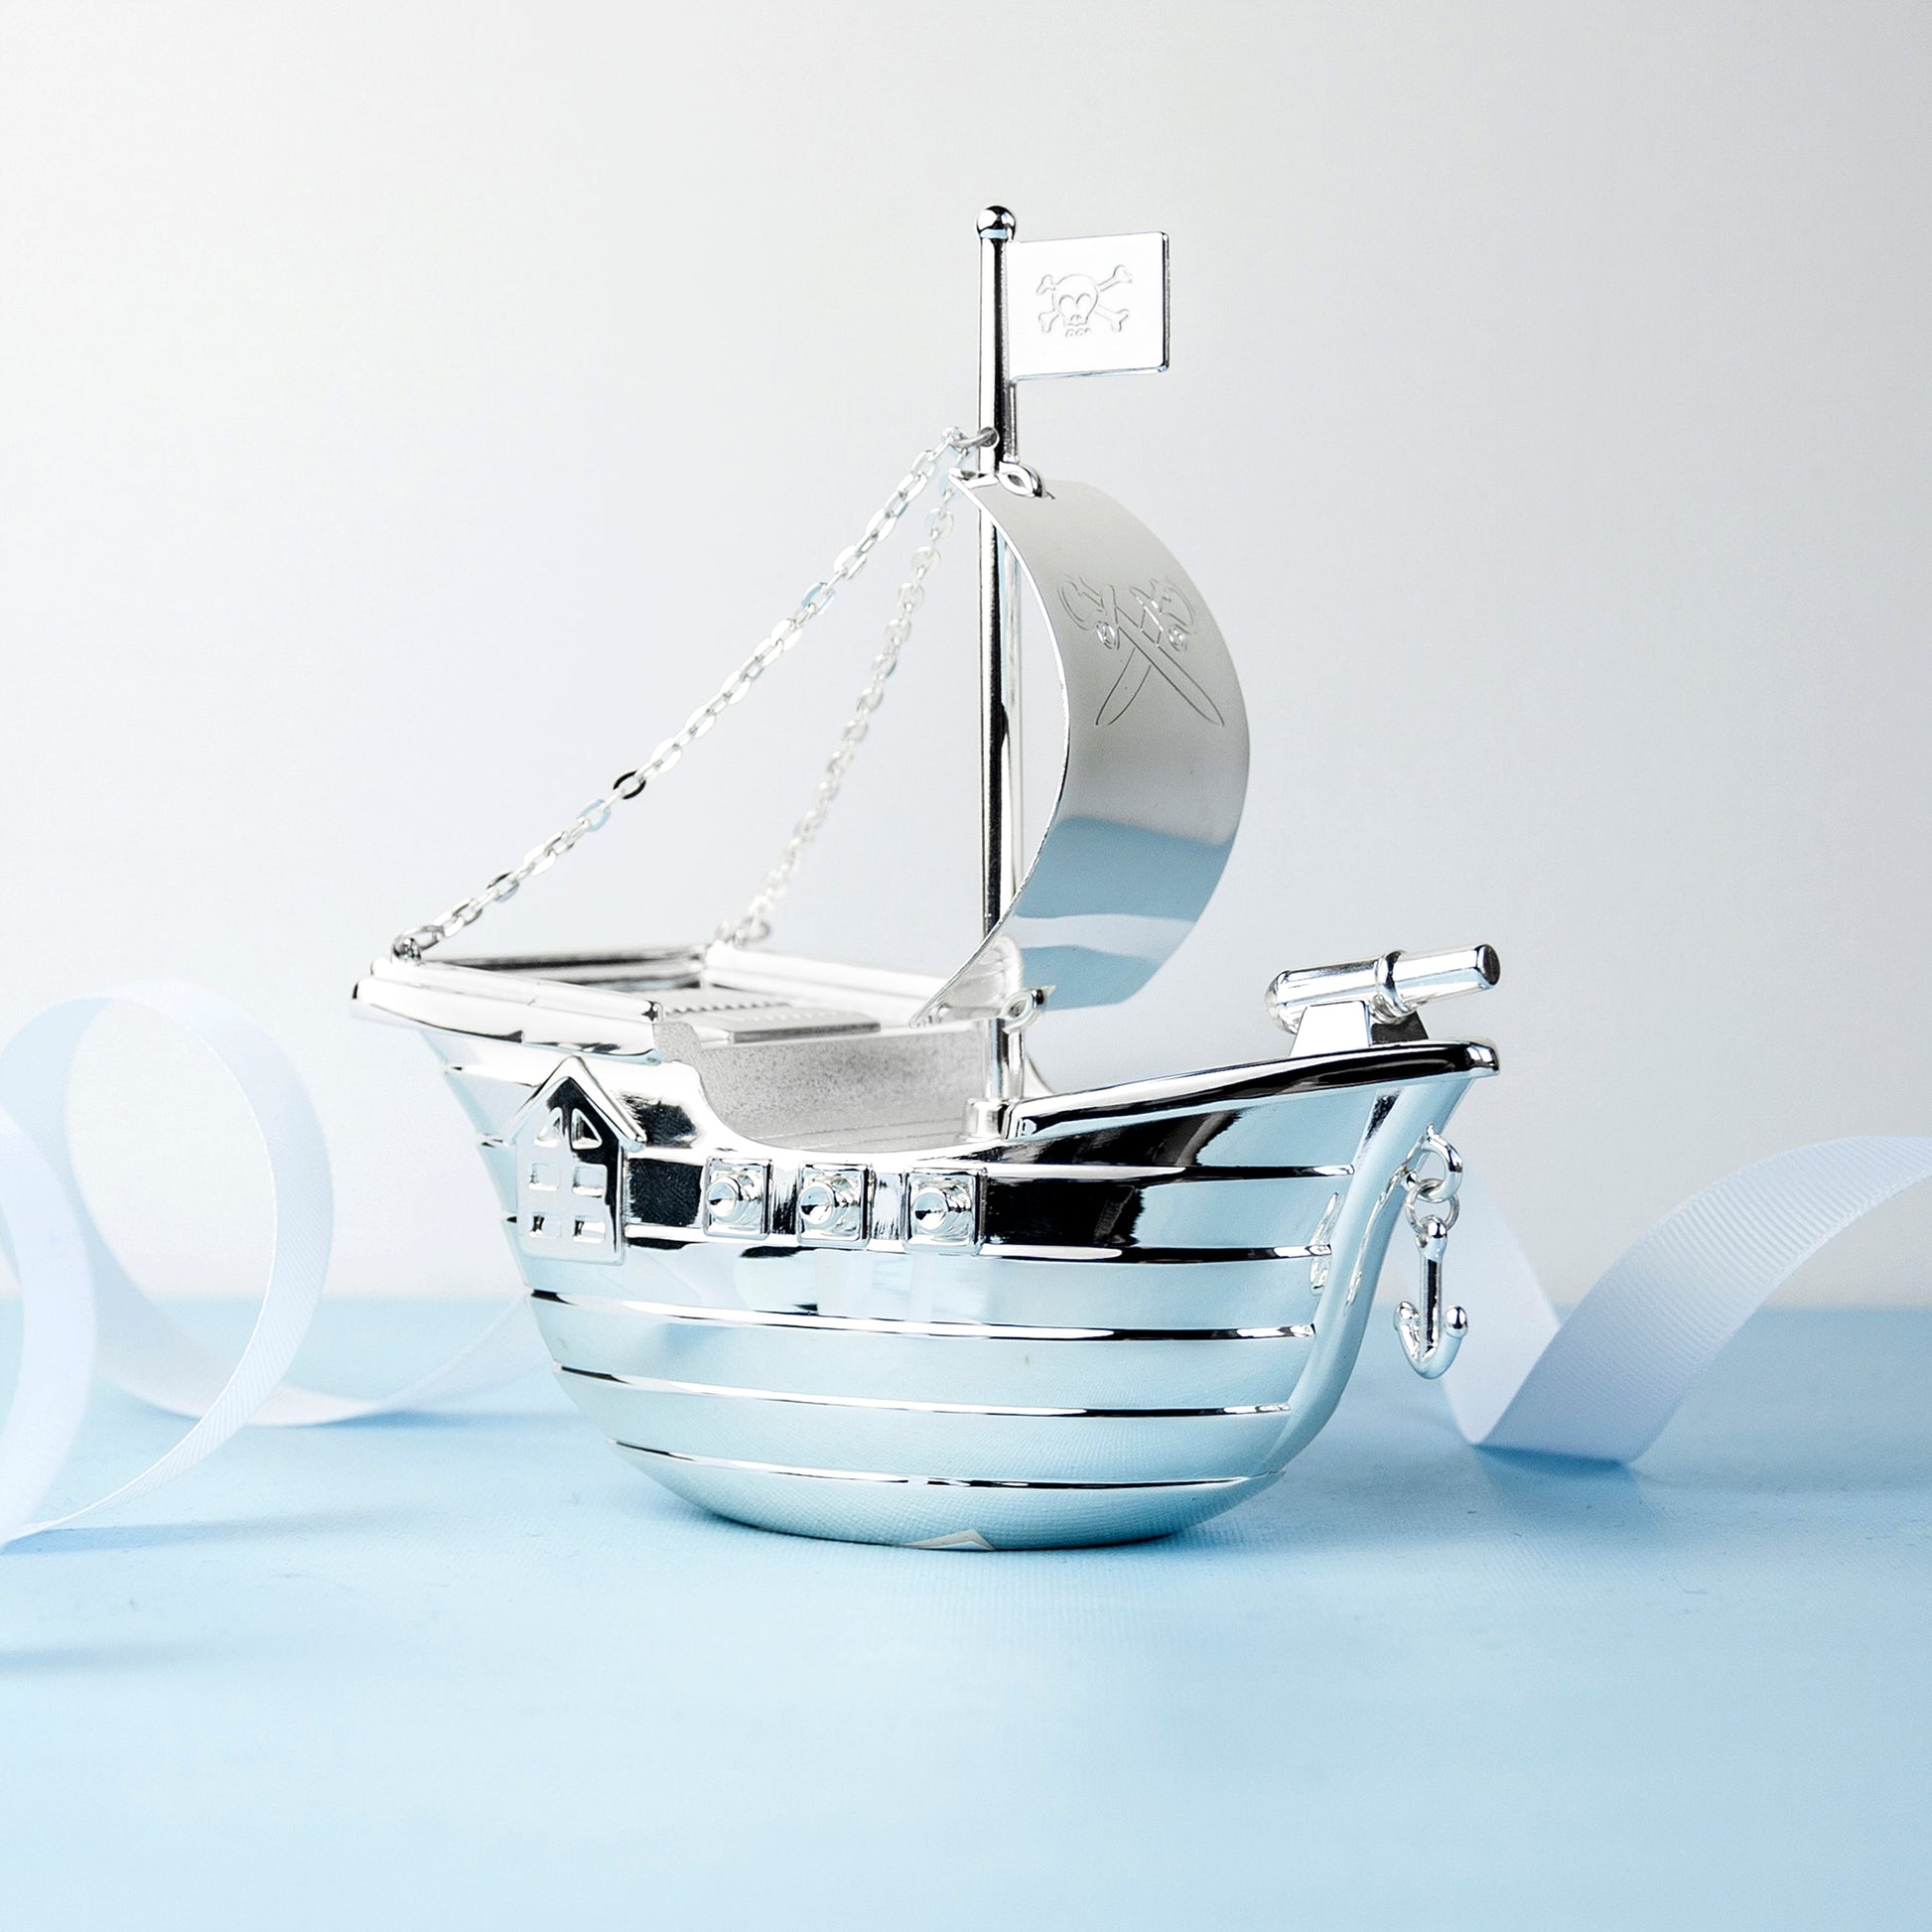 Personalized Money Boxes - Personalized Silver Plated Pirate Ship Money Box 